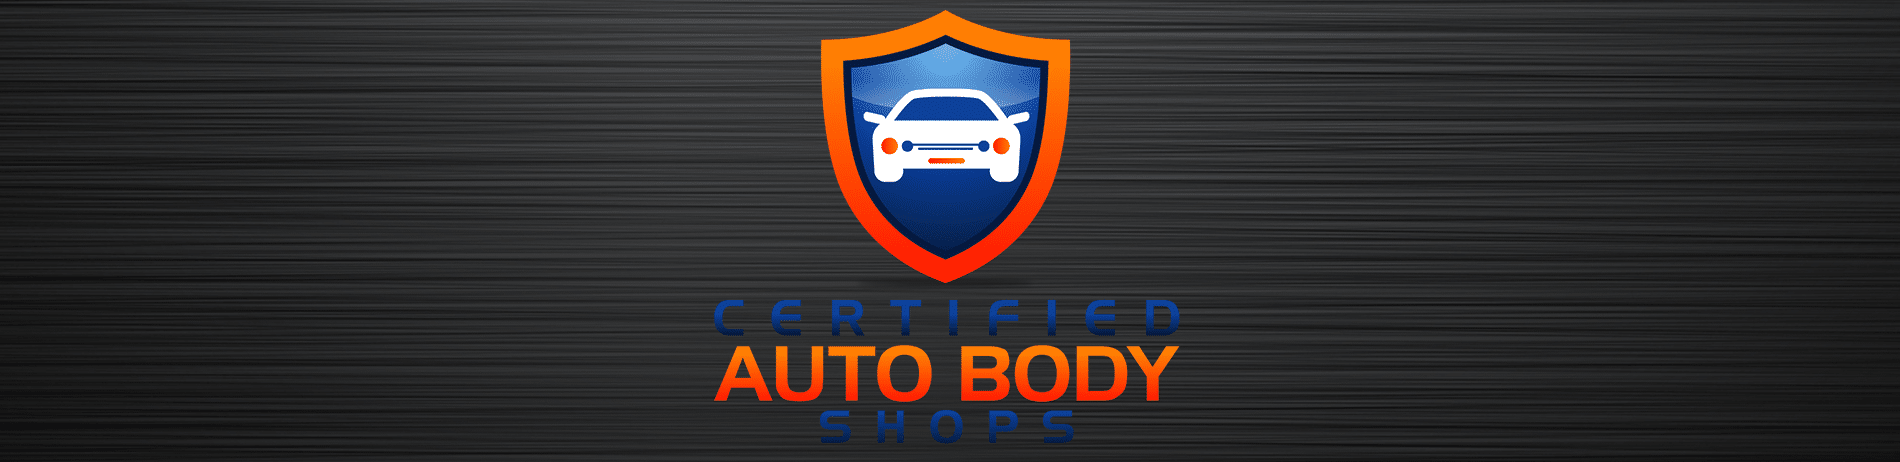 Land Rover Certified Auto Body Shop